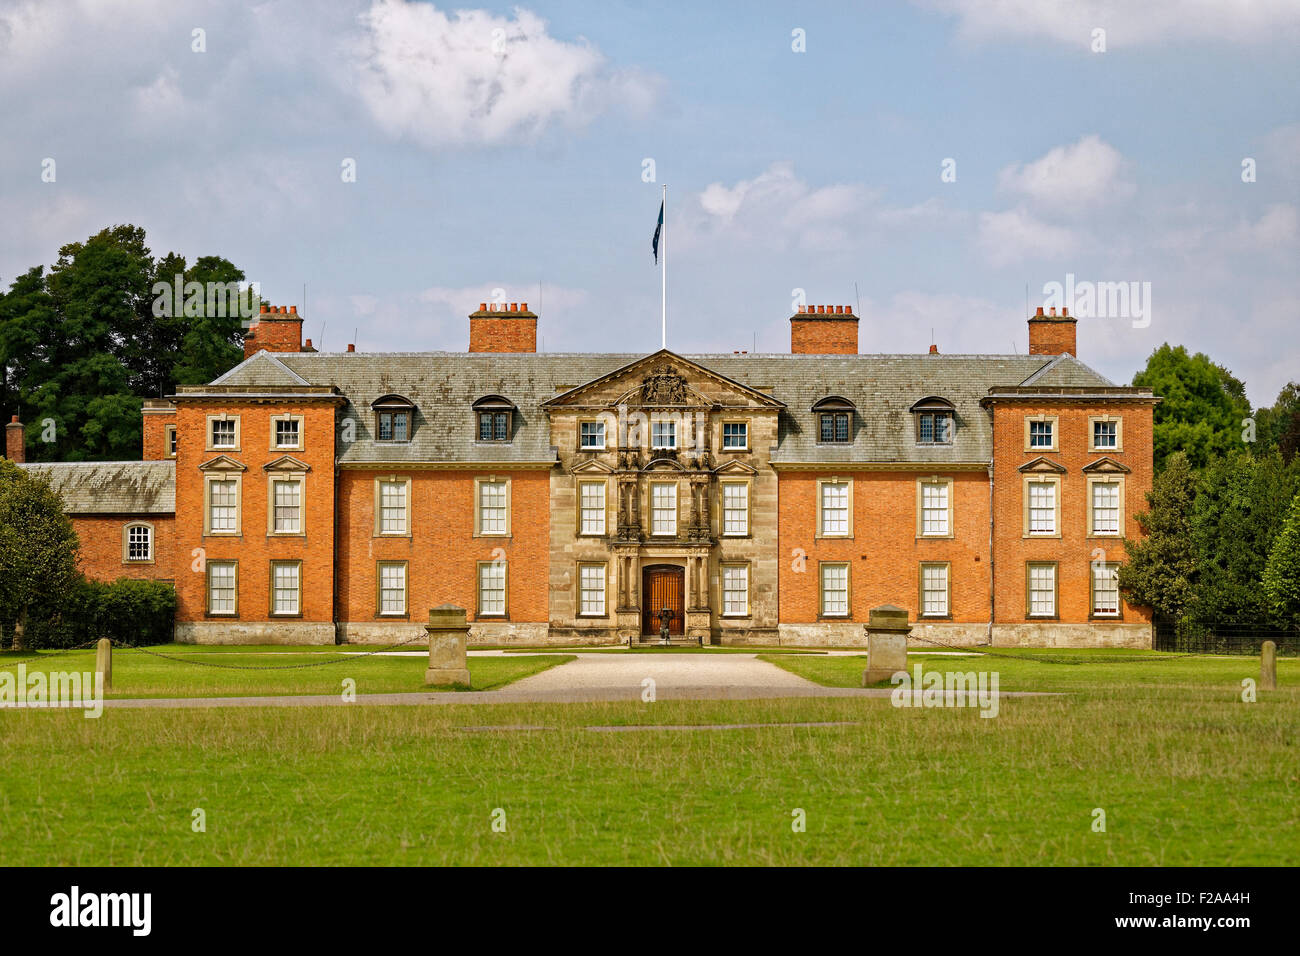 Dunham Massey Hall, Dunham Park, Altrincham, Cheshire. Greater Manchester. Former seat of The Lord Stamford. Stock Photo